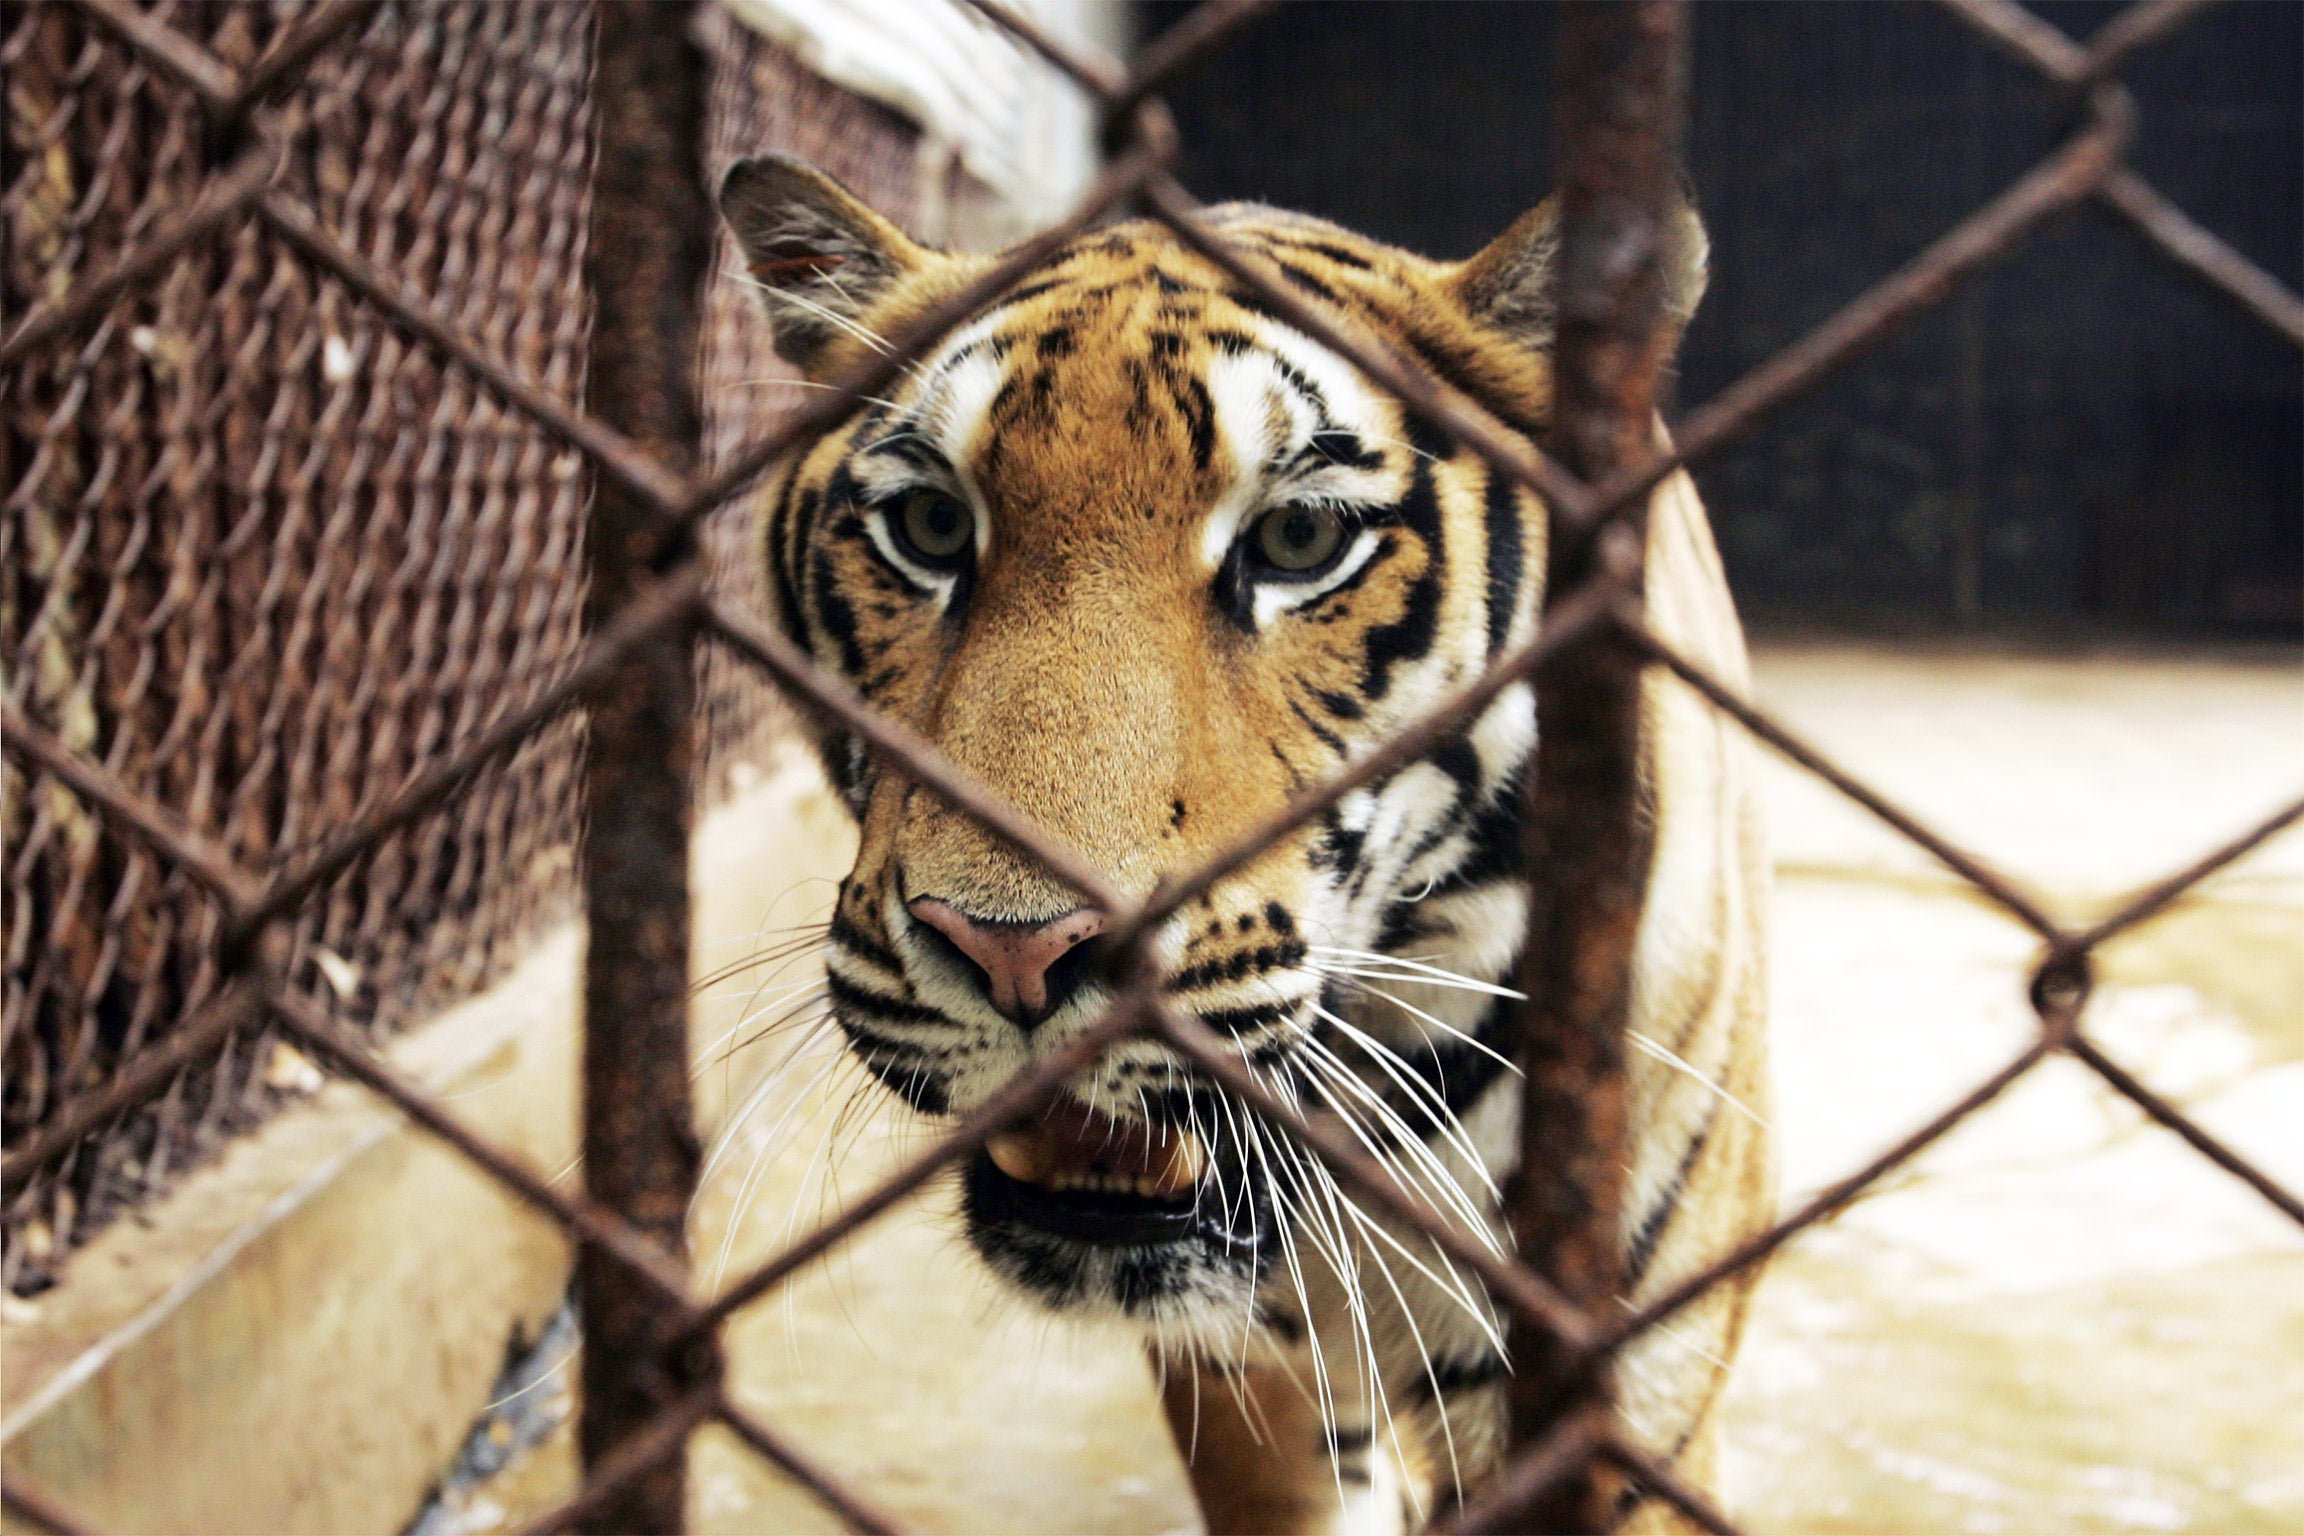 The Xiongsen Bear and Tiger Mountain village is the largest tiger captivity centre, or ‘tiger farm’, in China